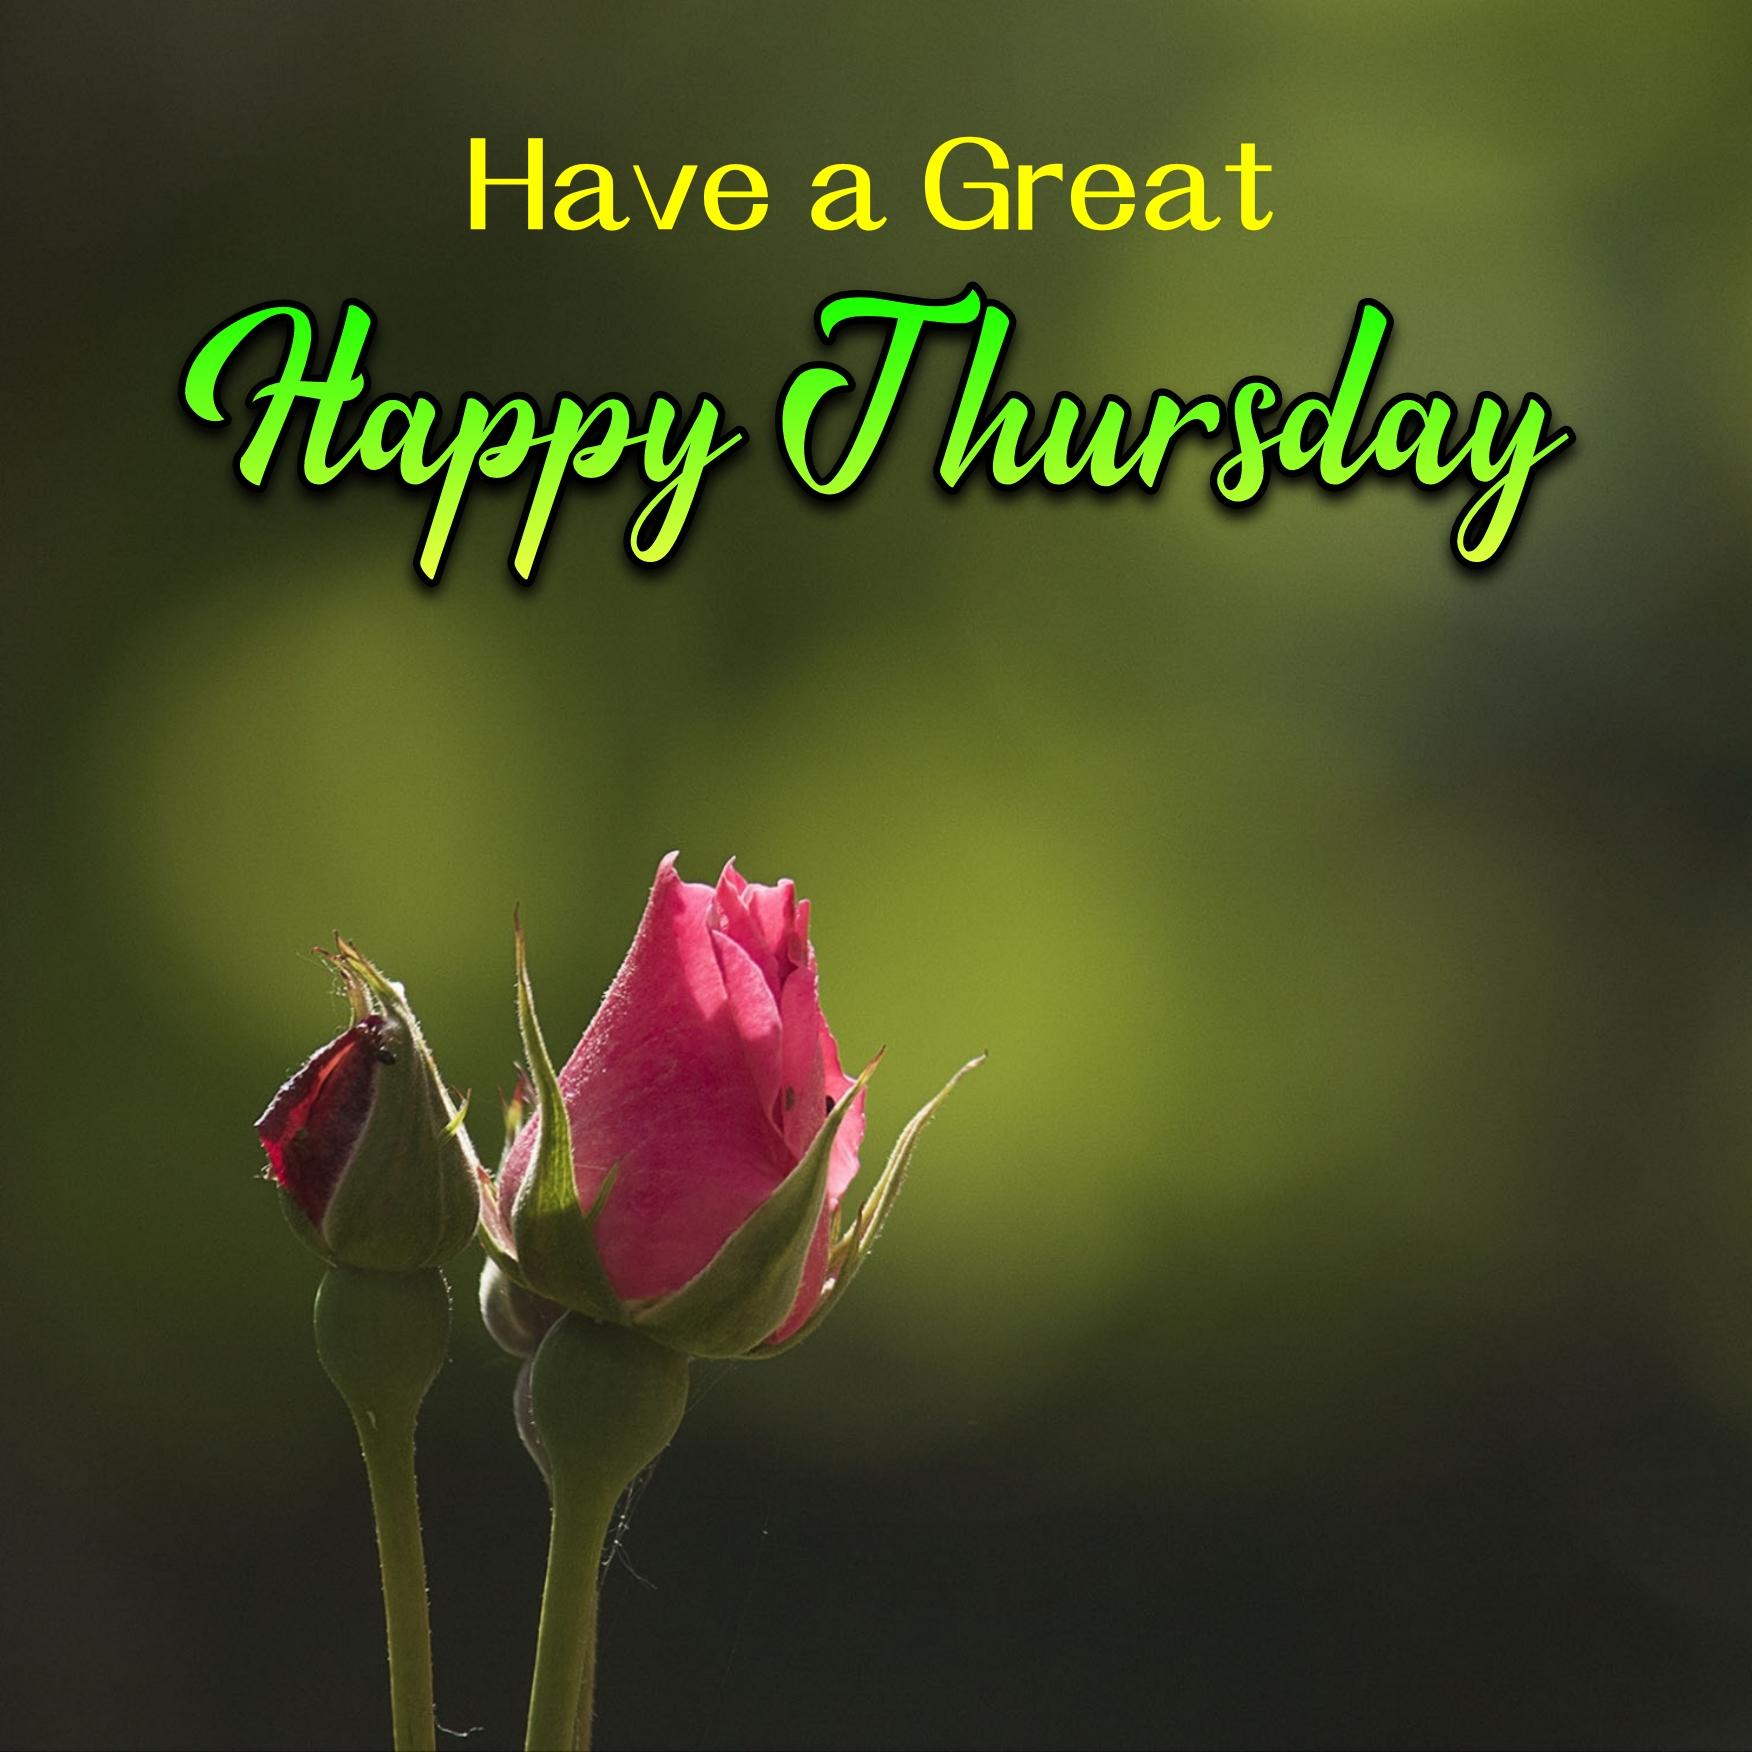 Have a Great Happy Thursday Images